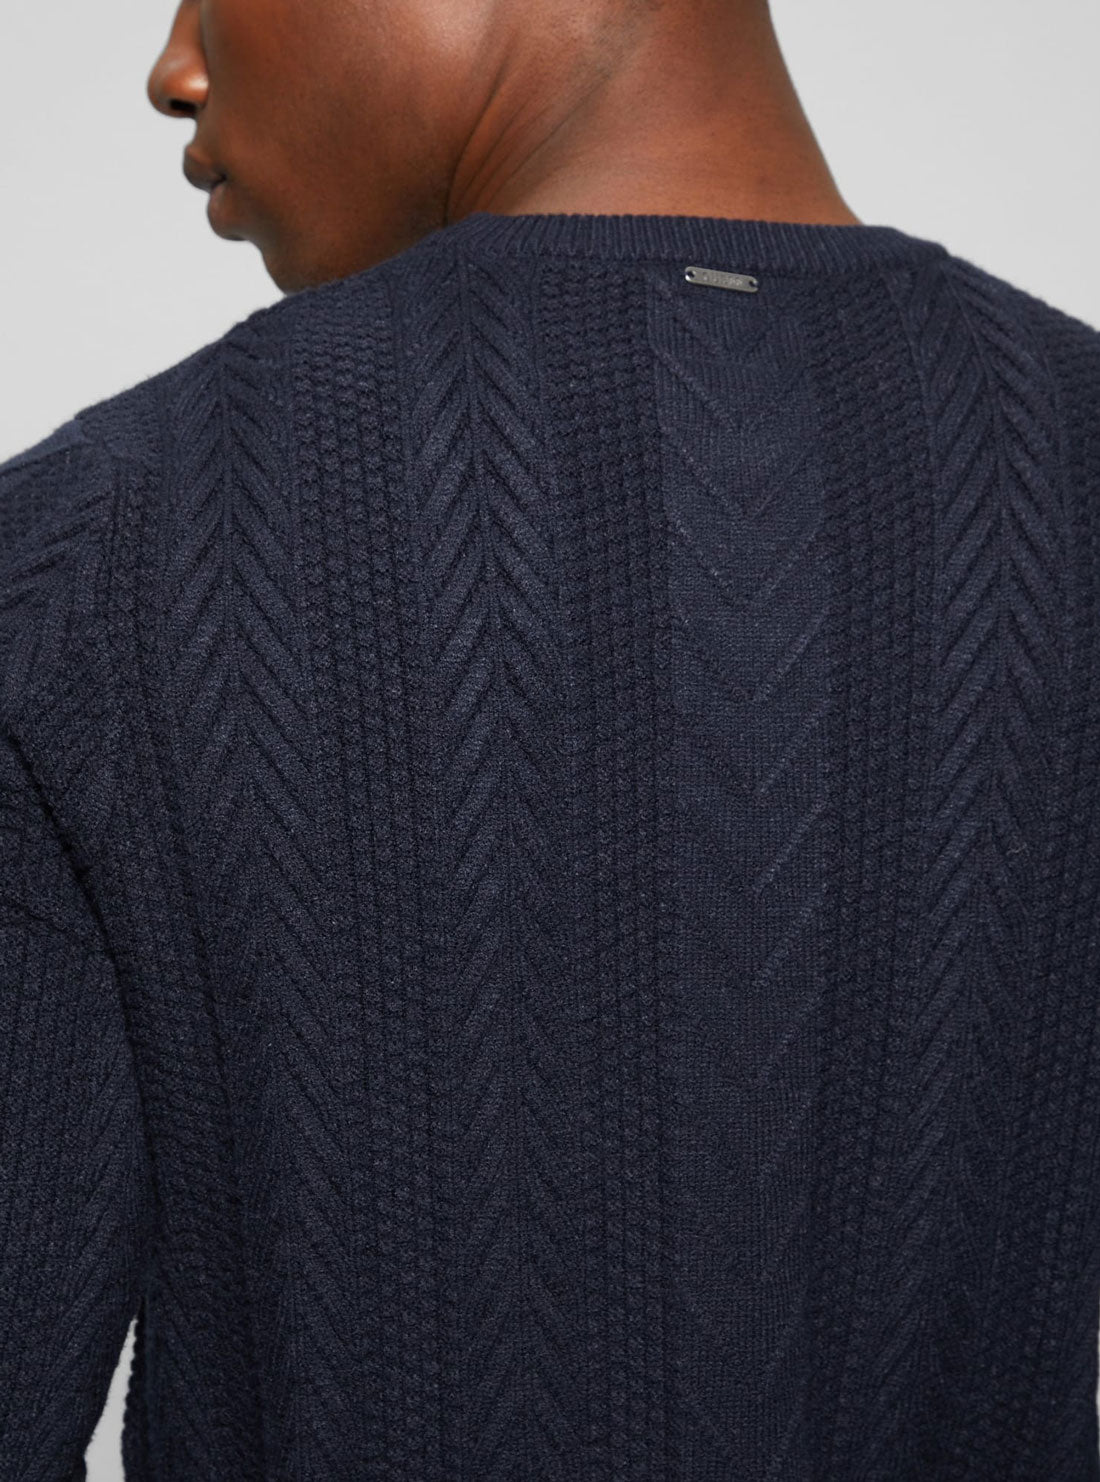 Navy Blue Cable Ethan Knit Top | GUESS men's apparel | back detail view